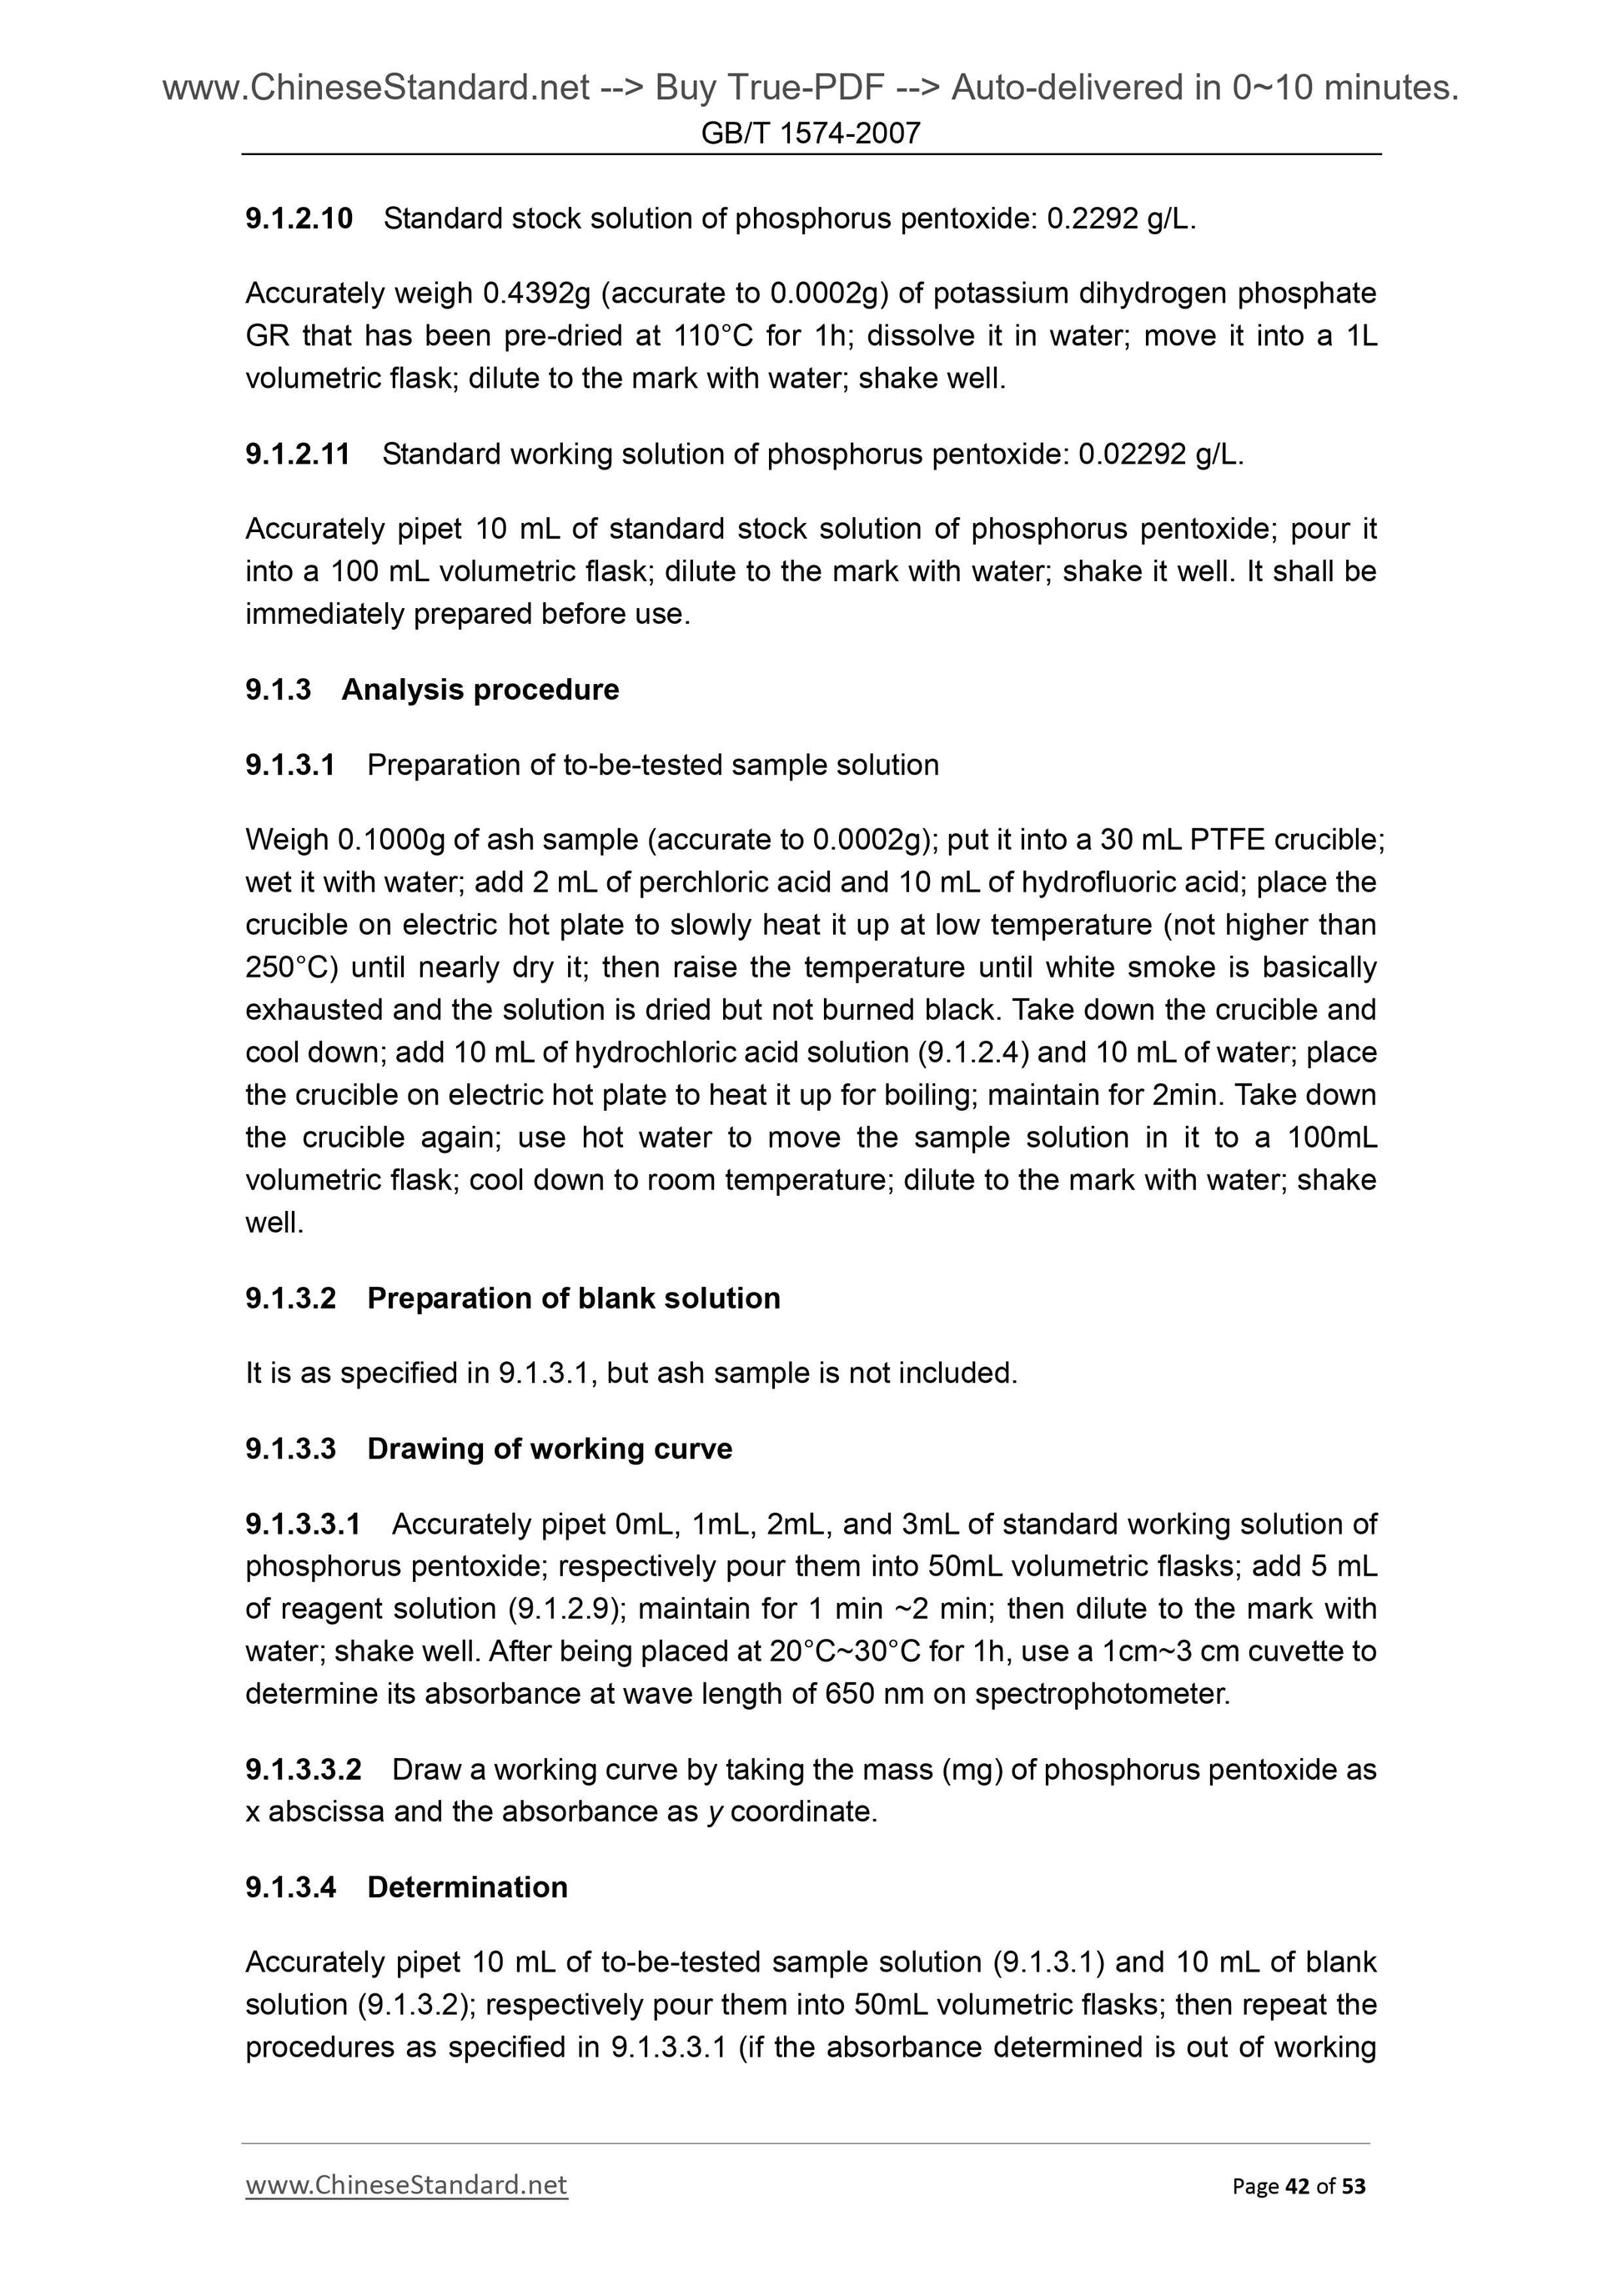 GB/T 1574-2007 Page 12